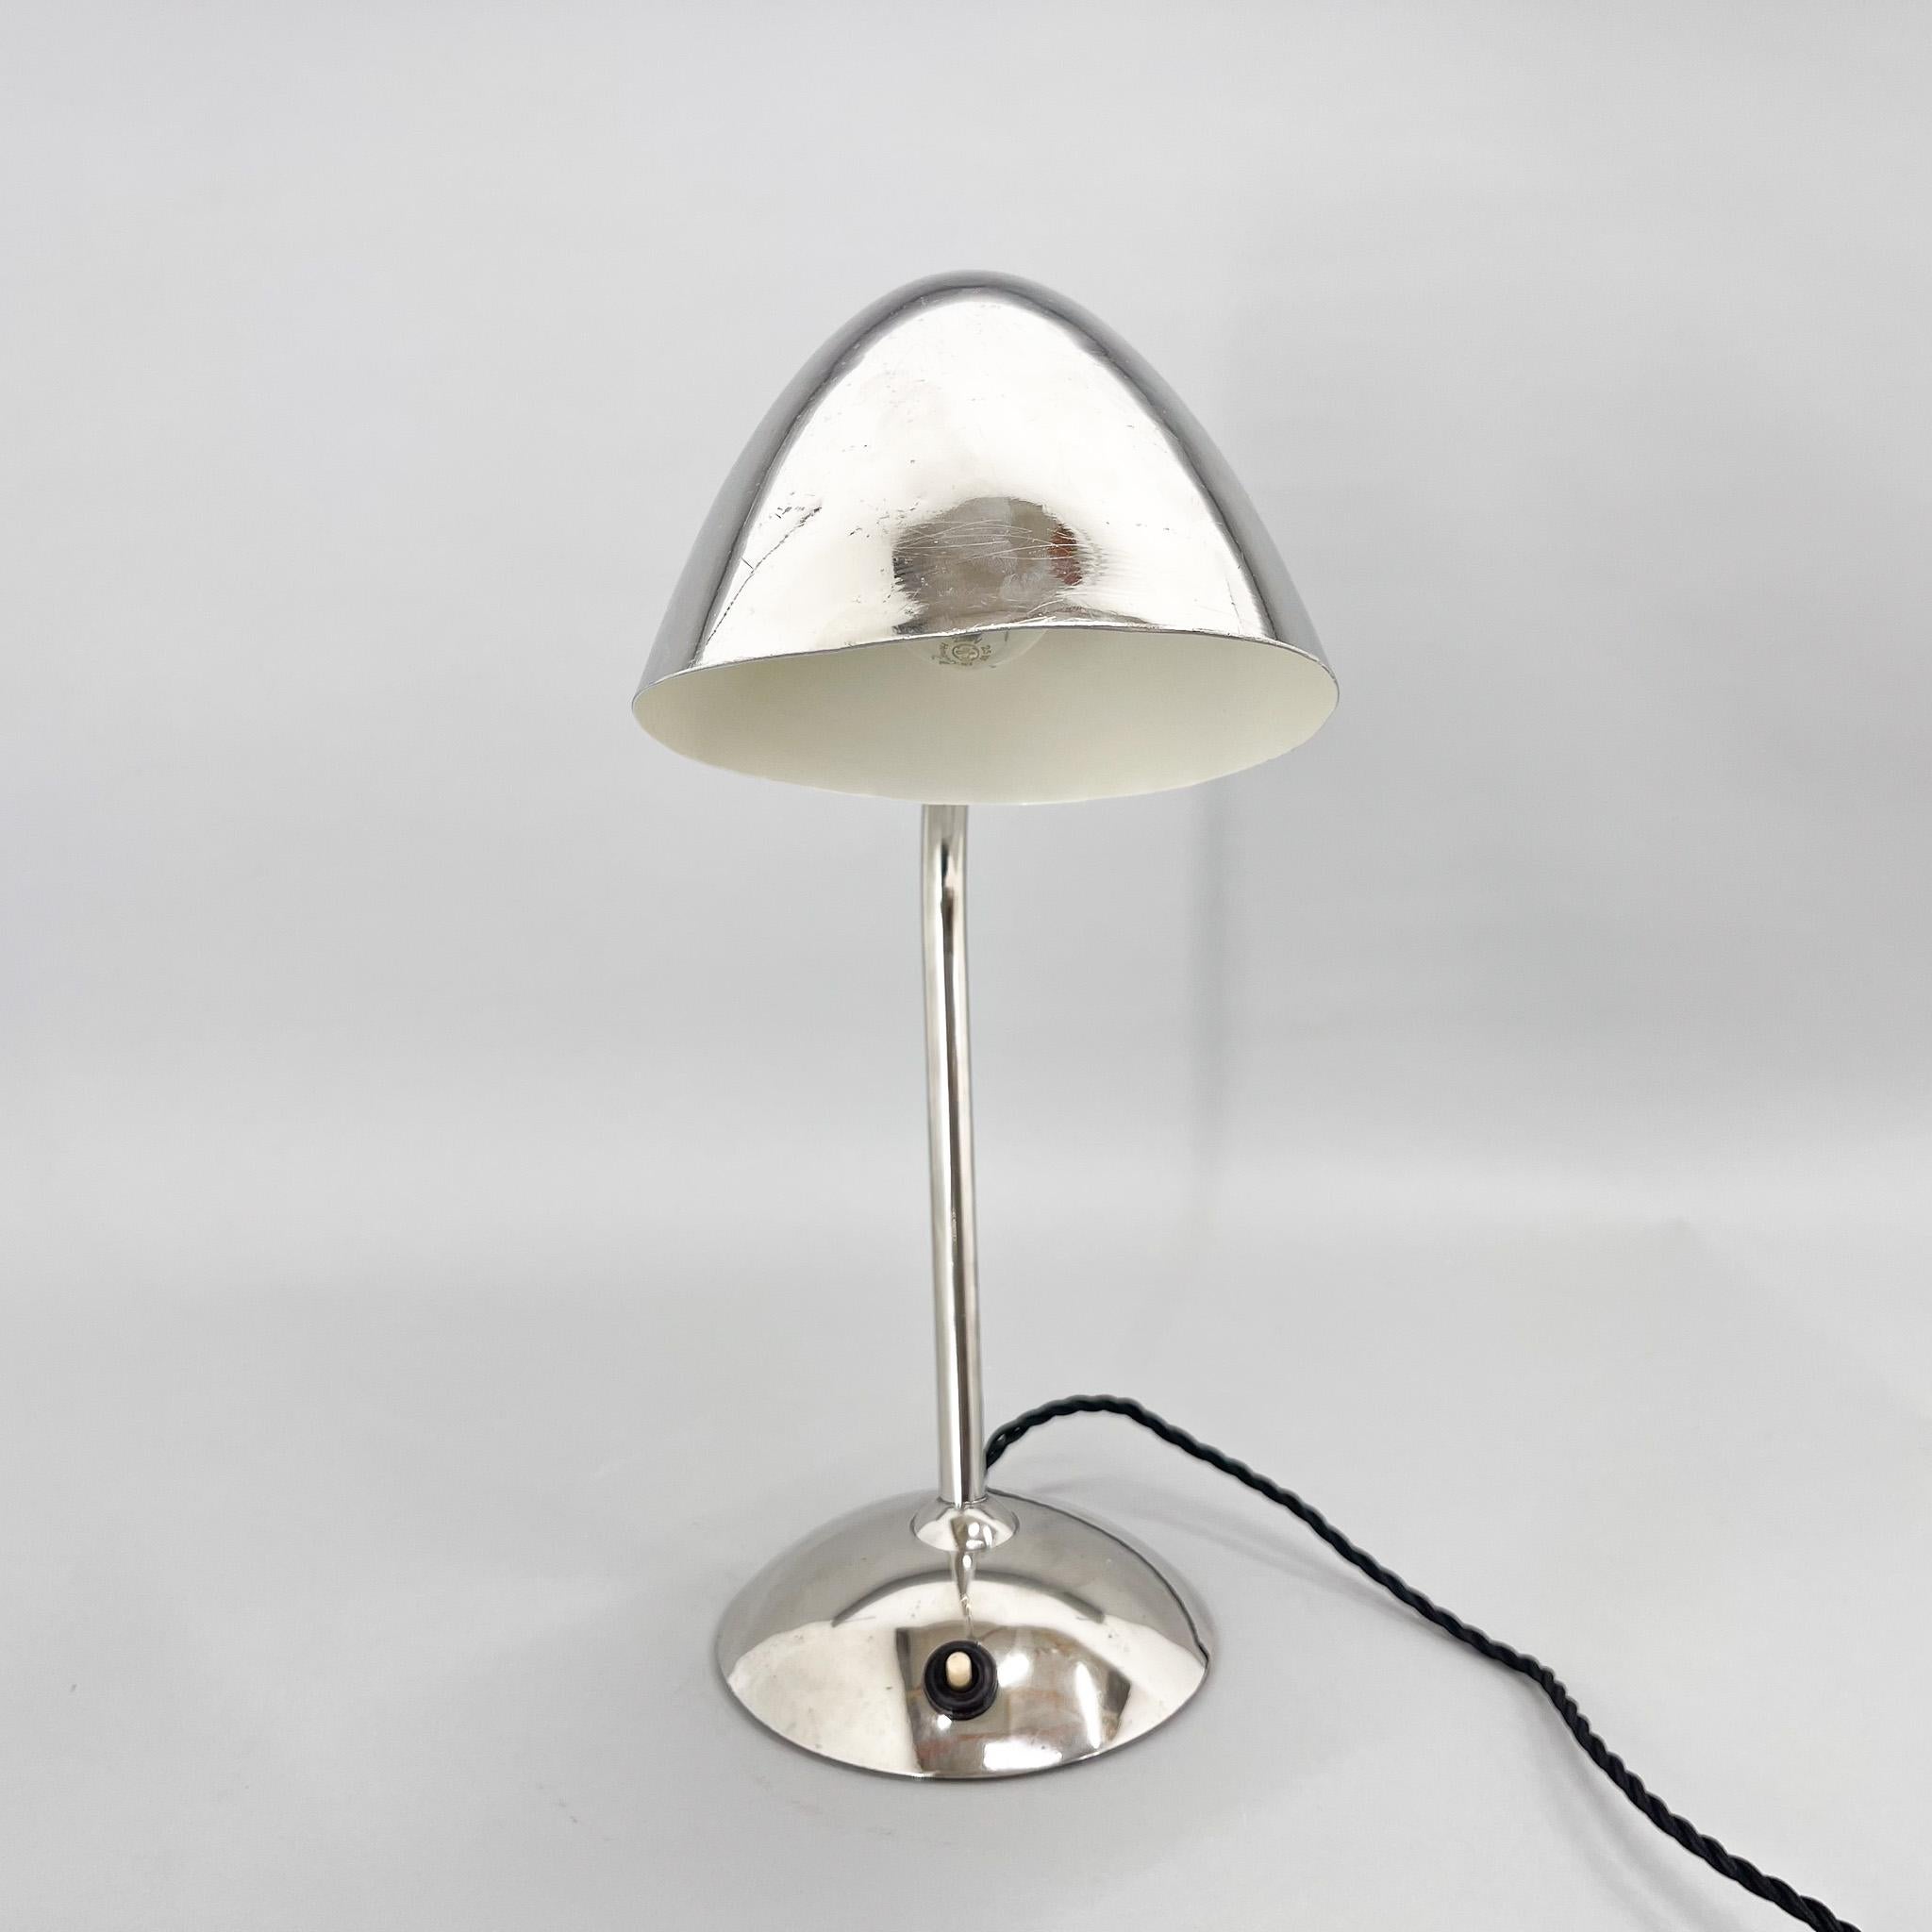 Functionalist / Bauhaus Flexible Table Lamp by Franta Anyz, 1930s For Sale 2